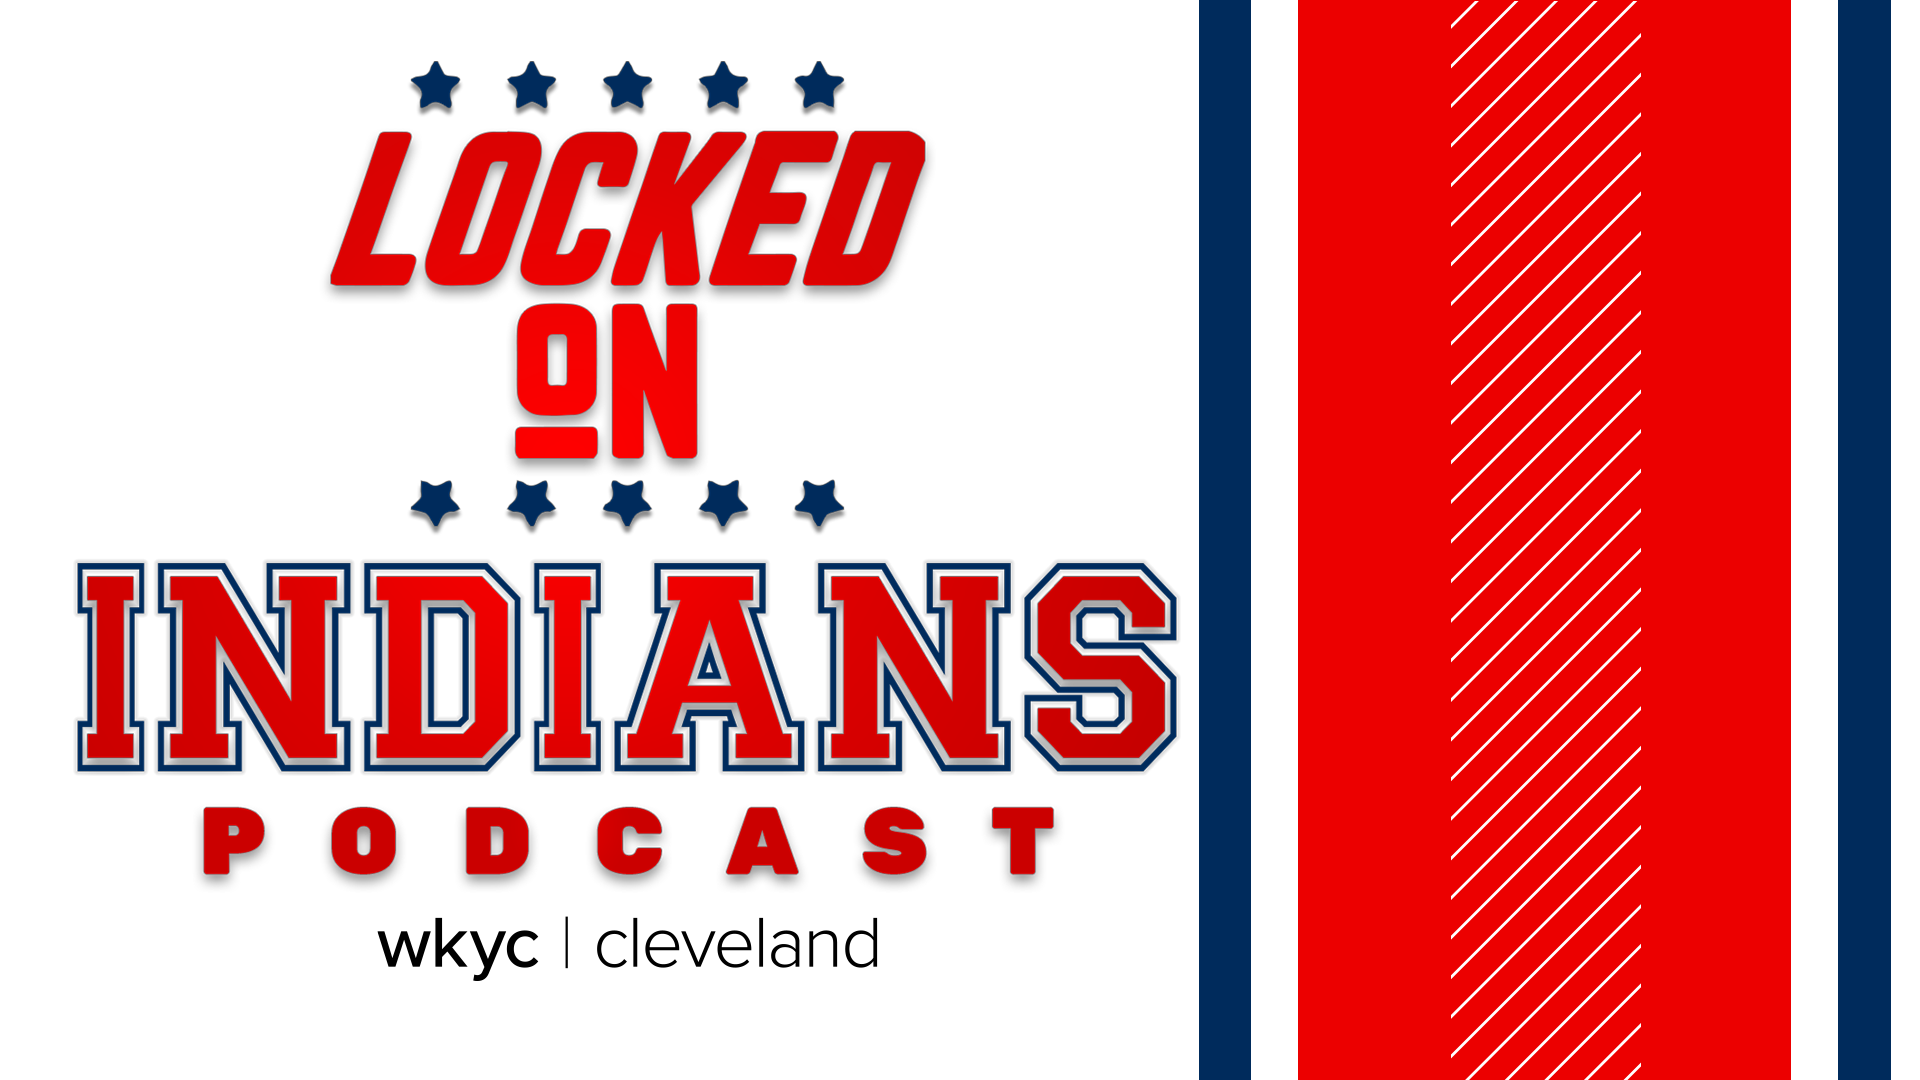 Locked On Indians' Jeff Ellis is joined by Eric Huysman for a check-in on the Houston Astros.